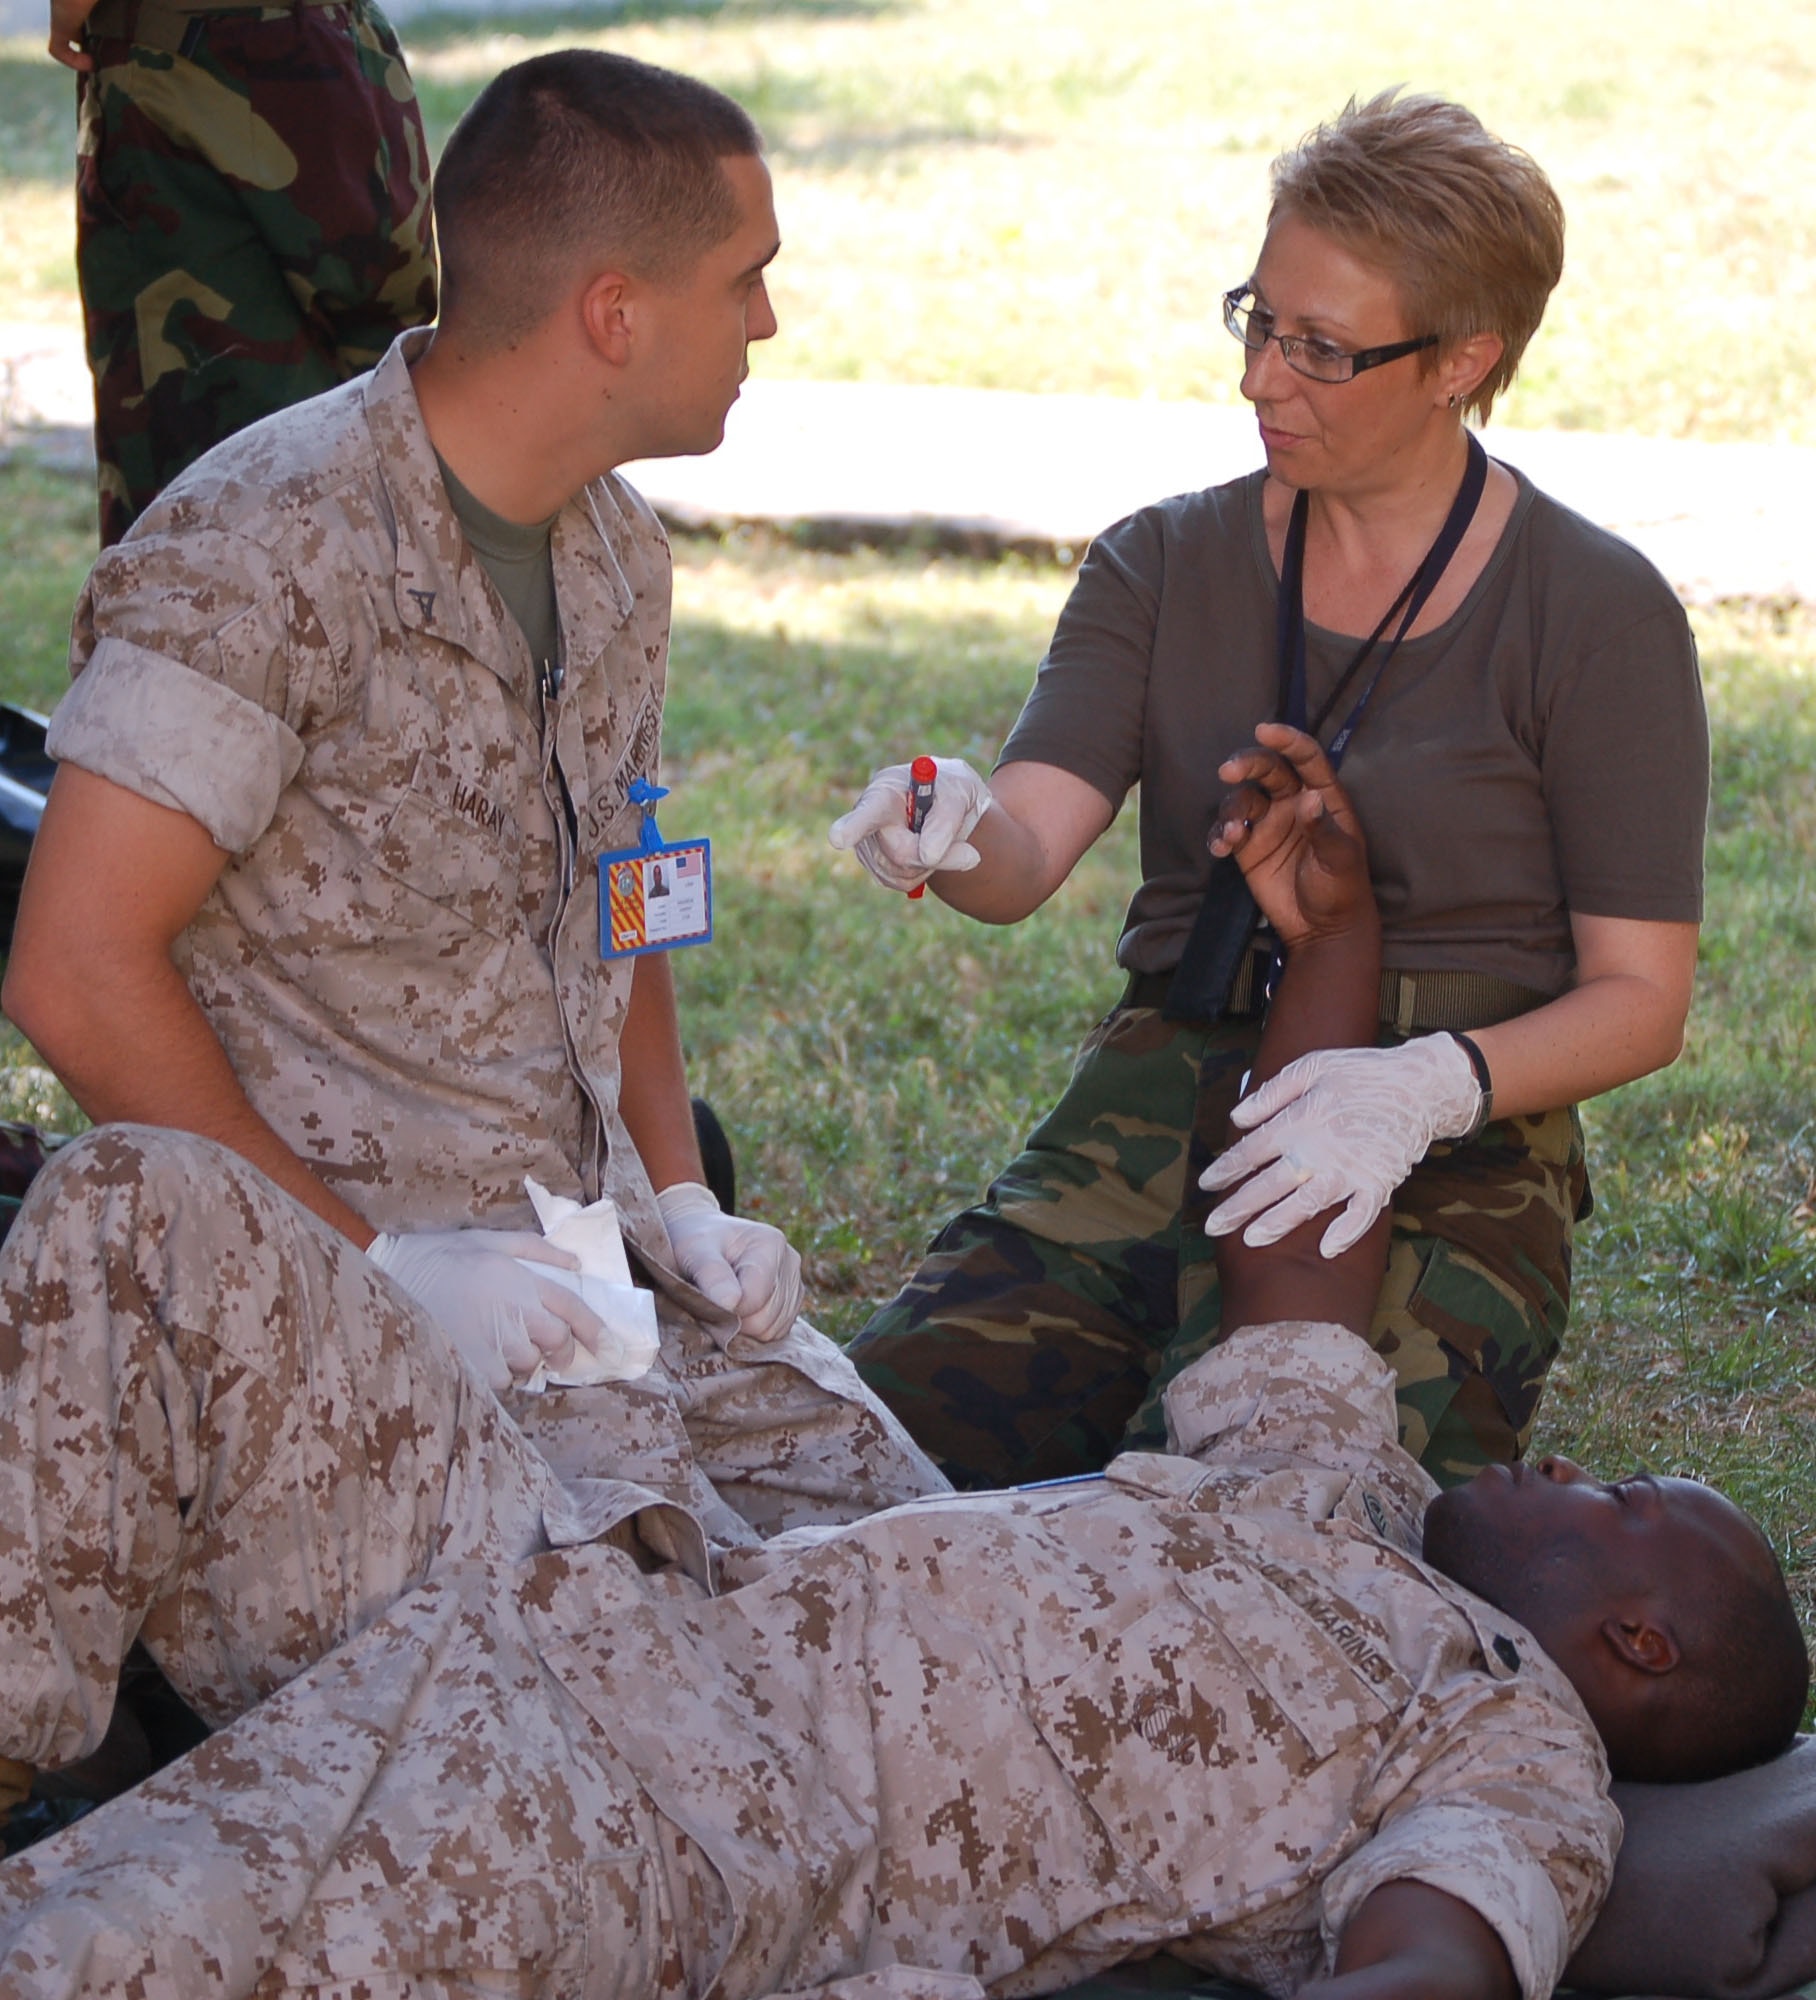 NIS, Serbia – Dona Poptrandova, Macedonian senior medical nurse and combat lifesaver course instructor supervisor, discusses possible medical scenarios with Lance Cpl. Andrew Haray (left) while Gunnery Sgt. Octavius Shivers plays the role of a wounded Marine Sept. 4 during the military medical training exercise in Central and Eastern Europe, or MEDCEUR 2009, combat lifesaver course. (U.S. Air Force photo/Senior Airman Kali L. Gradishar)